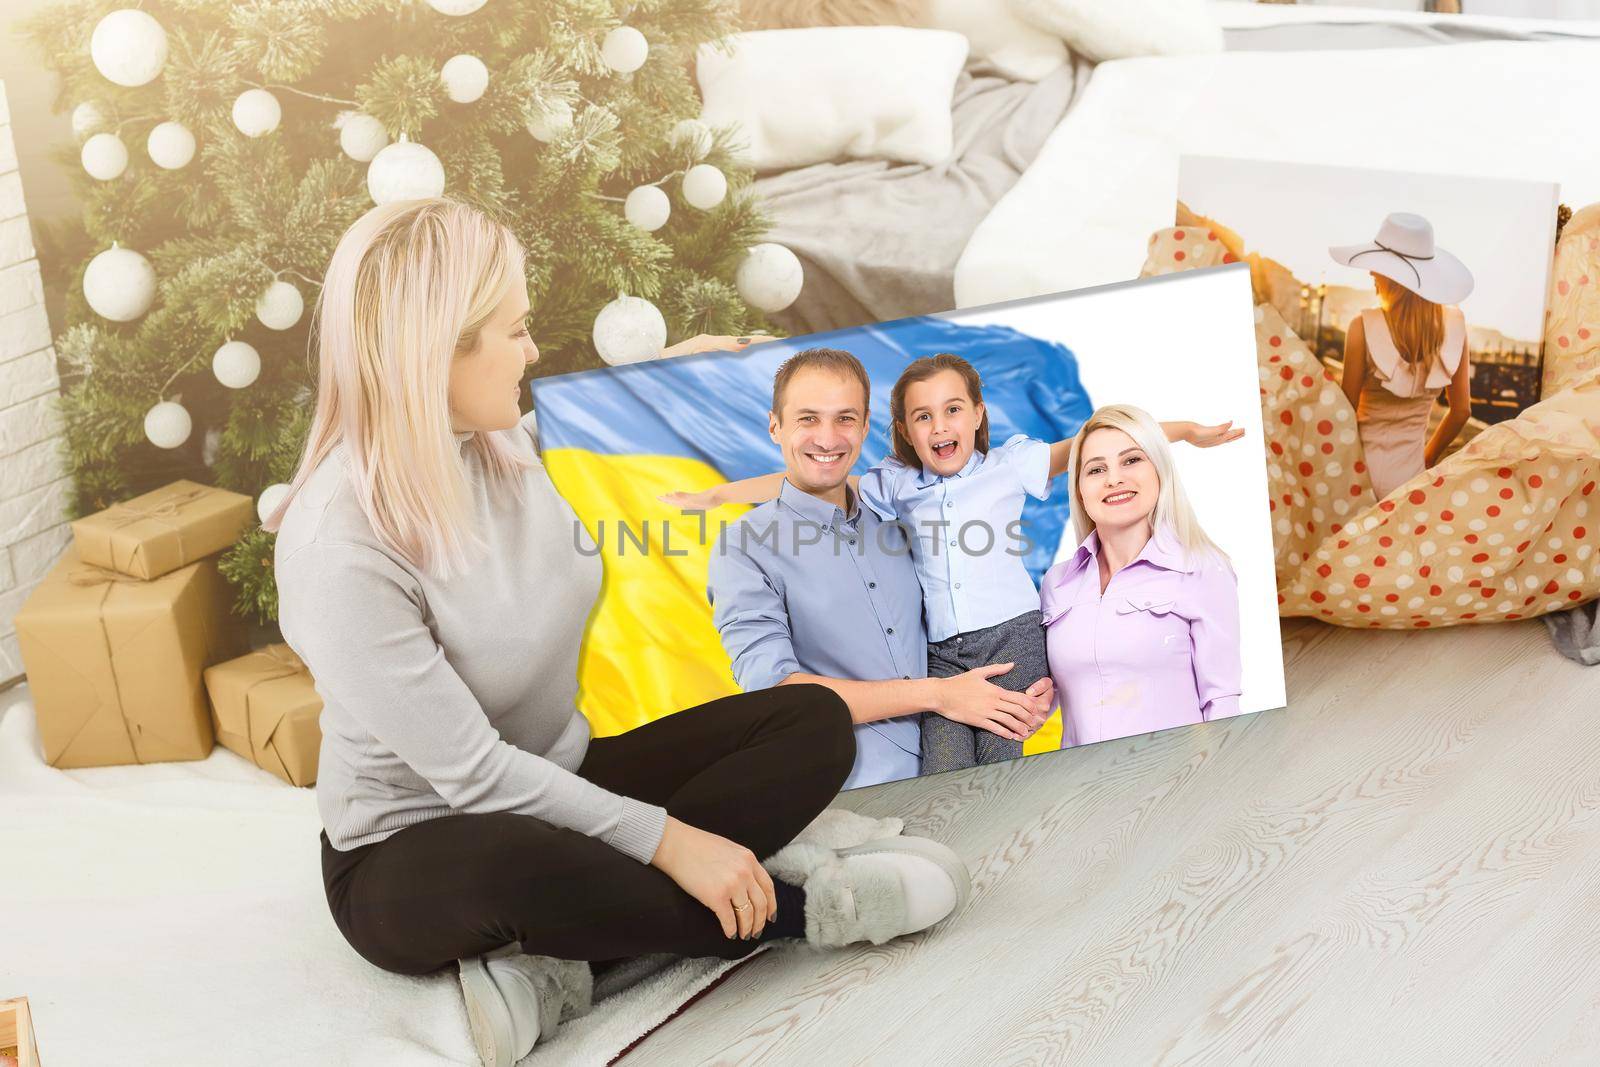 photo canvas people with the flag of Ukraine.